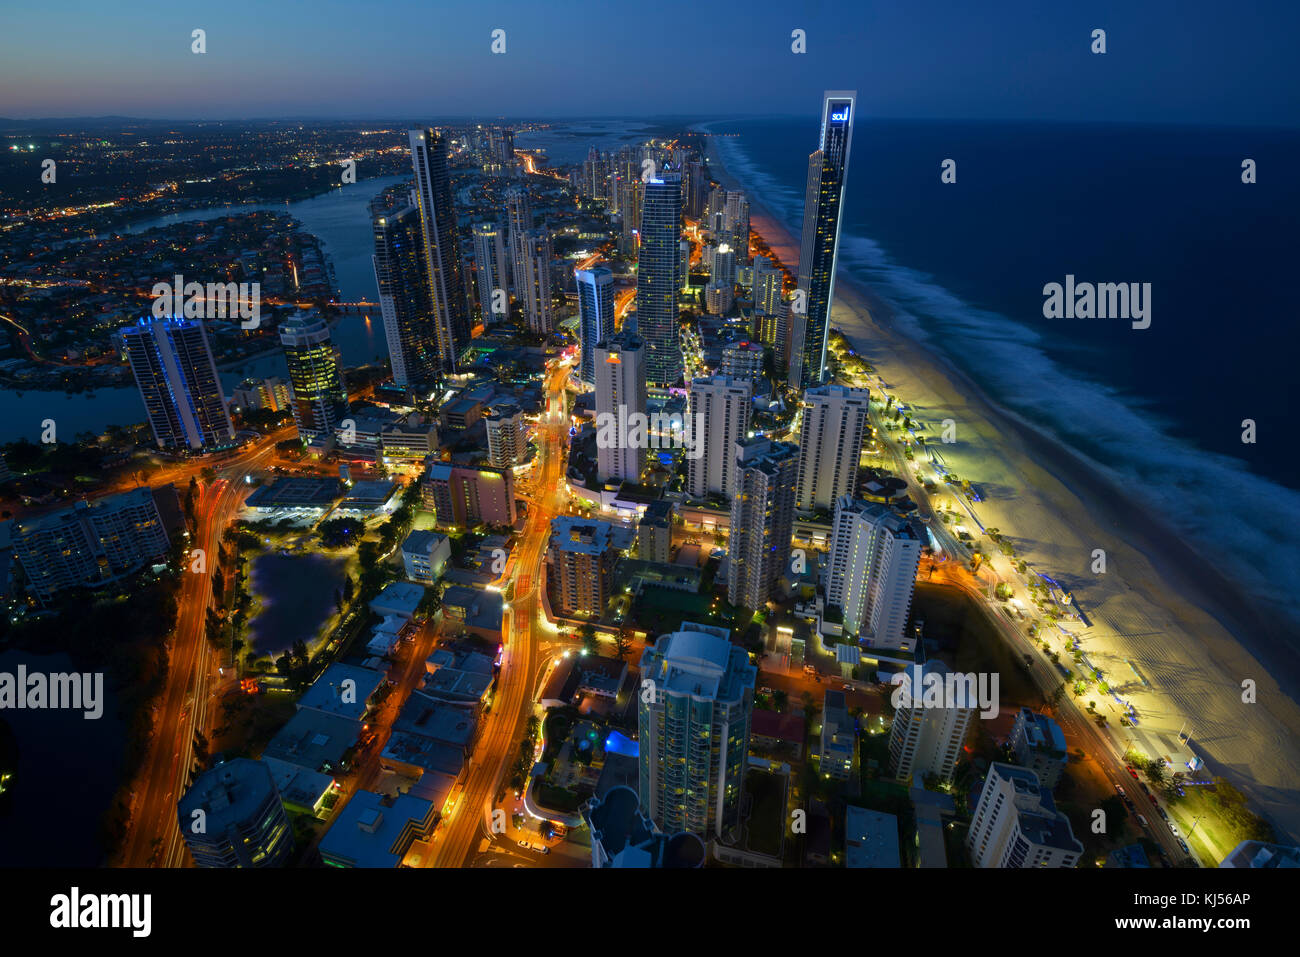 View of the Surfers Paradise on the Gold Coast, Queensland, Australia from the SkyPoint Observation Deck at Q1 Building. Stock Photo